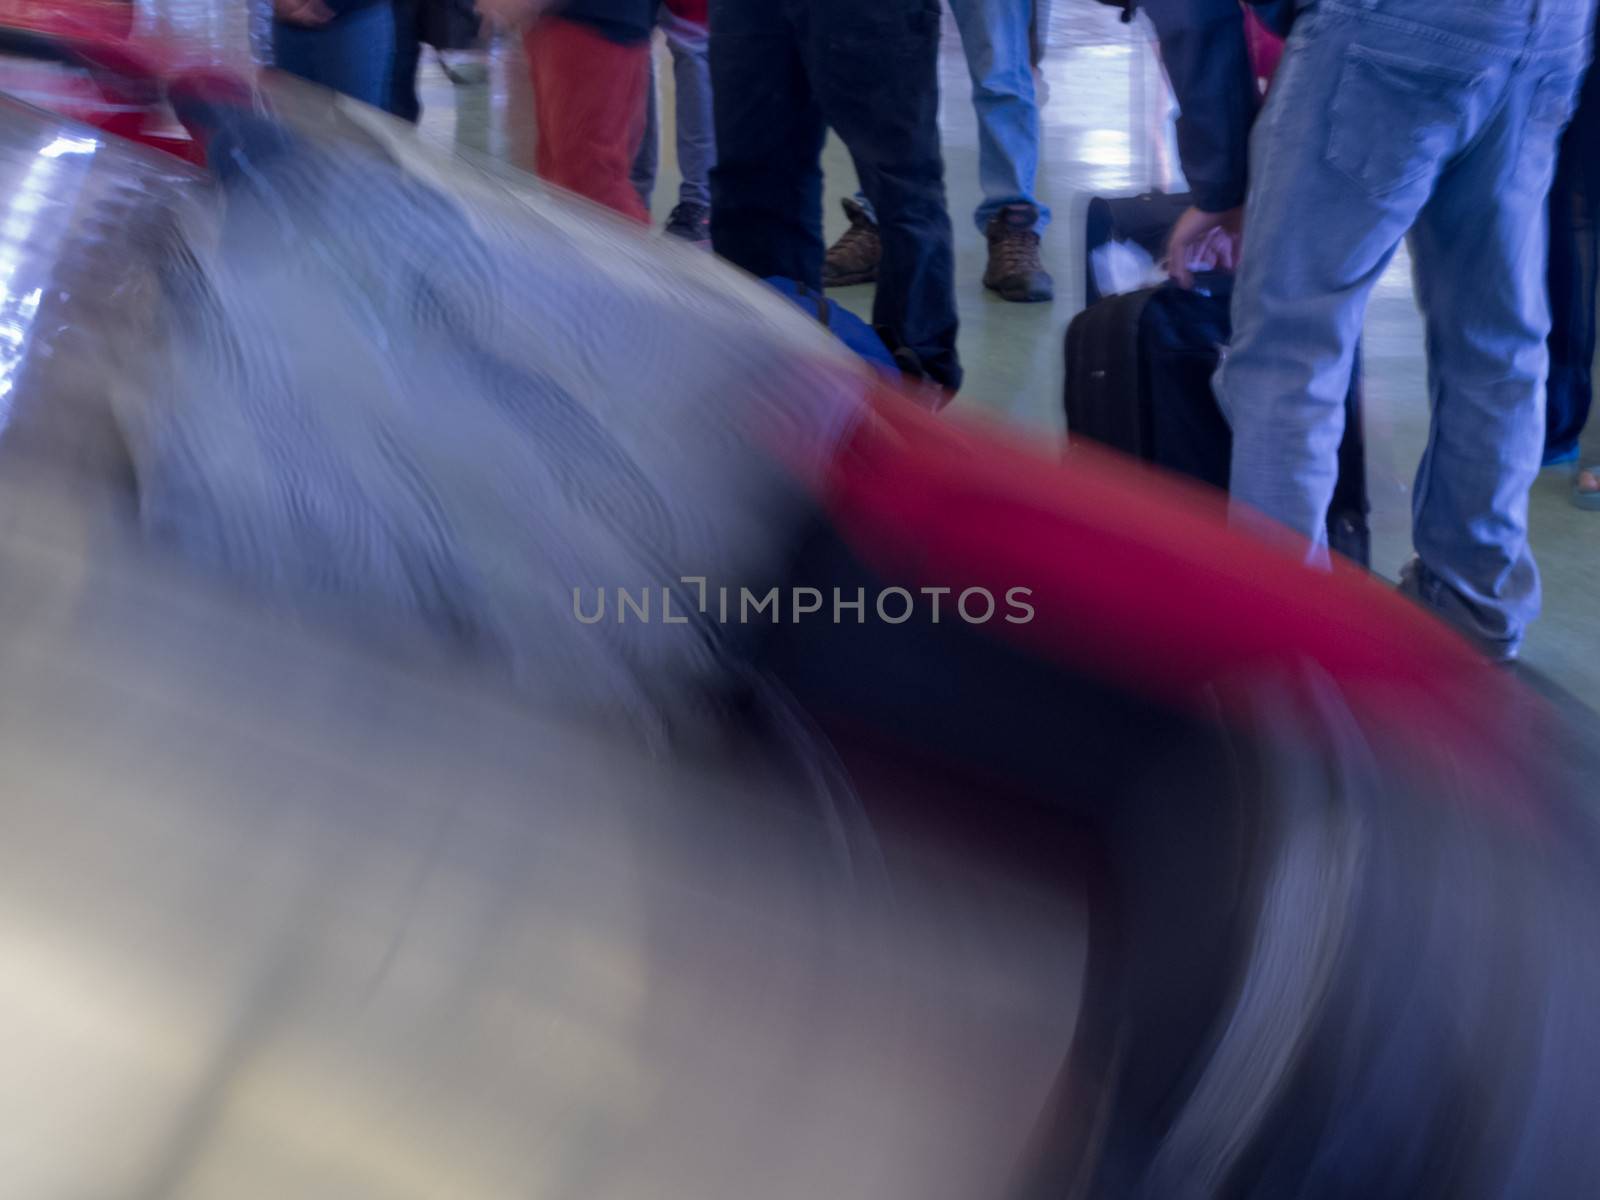 Airport baggage claim, passengers wait for their luggage on conveyor belt after flight landing